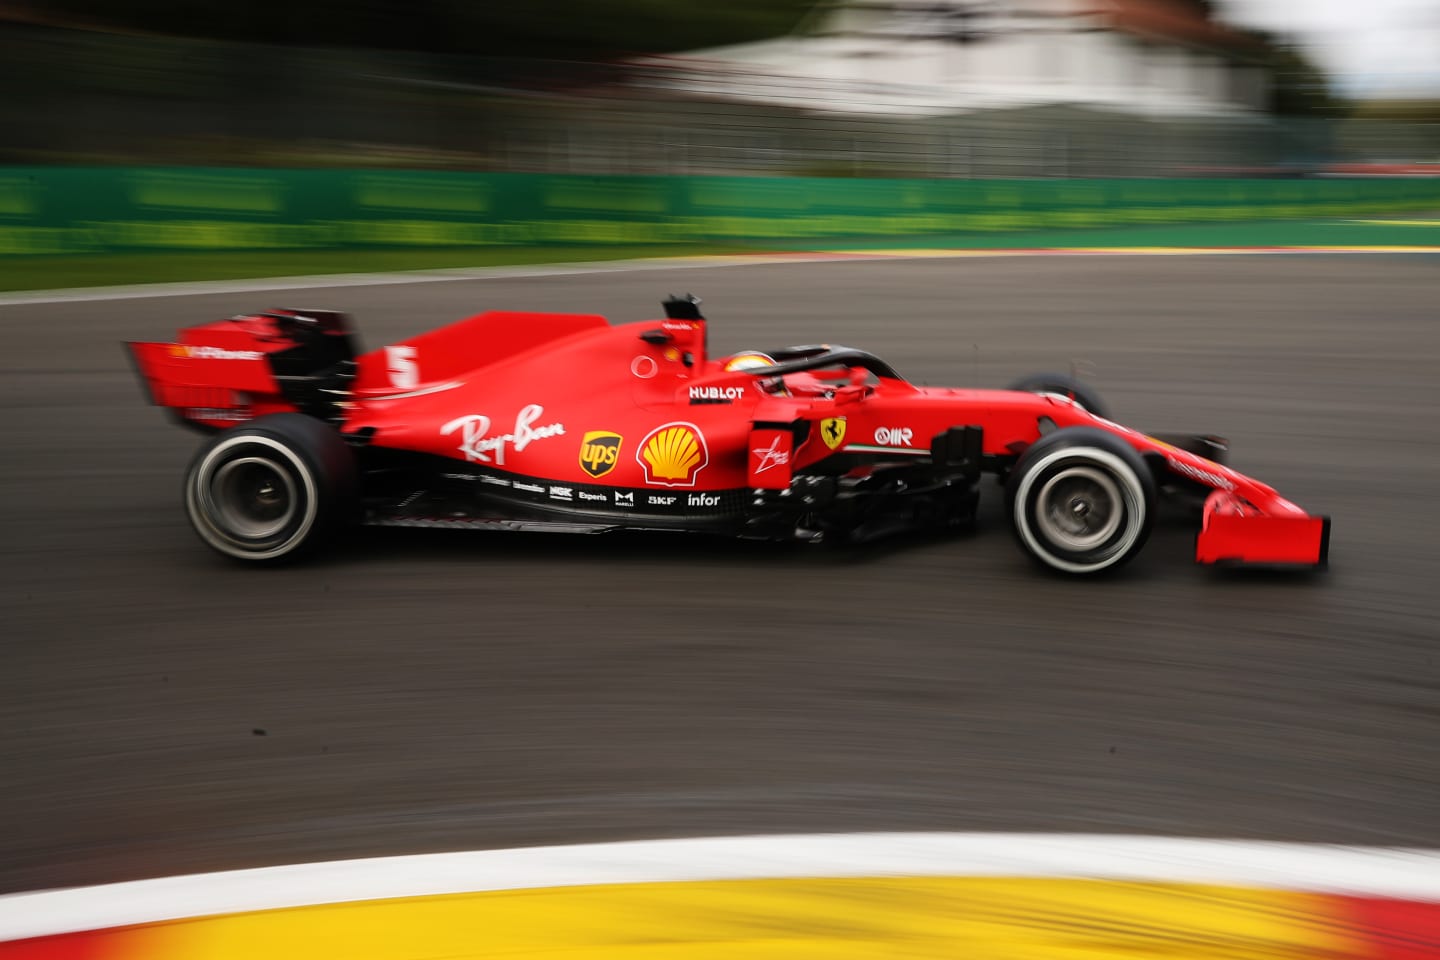 SPA, BELGIUM - AUGUST 28: Sebastian Vettel of Germany driving the (5) Scuderia Ferrari SF1000 on track during practice for the F1 Grand Prix of Belgium at Circuit de Spa-Francorchamps on August 28, 2020 in Spa, Belgium. (Photo by Francisco Seco/Pool via Getty Images)